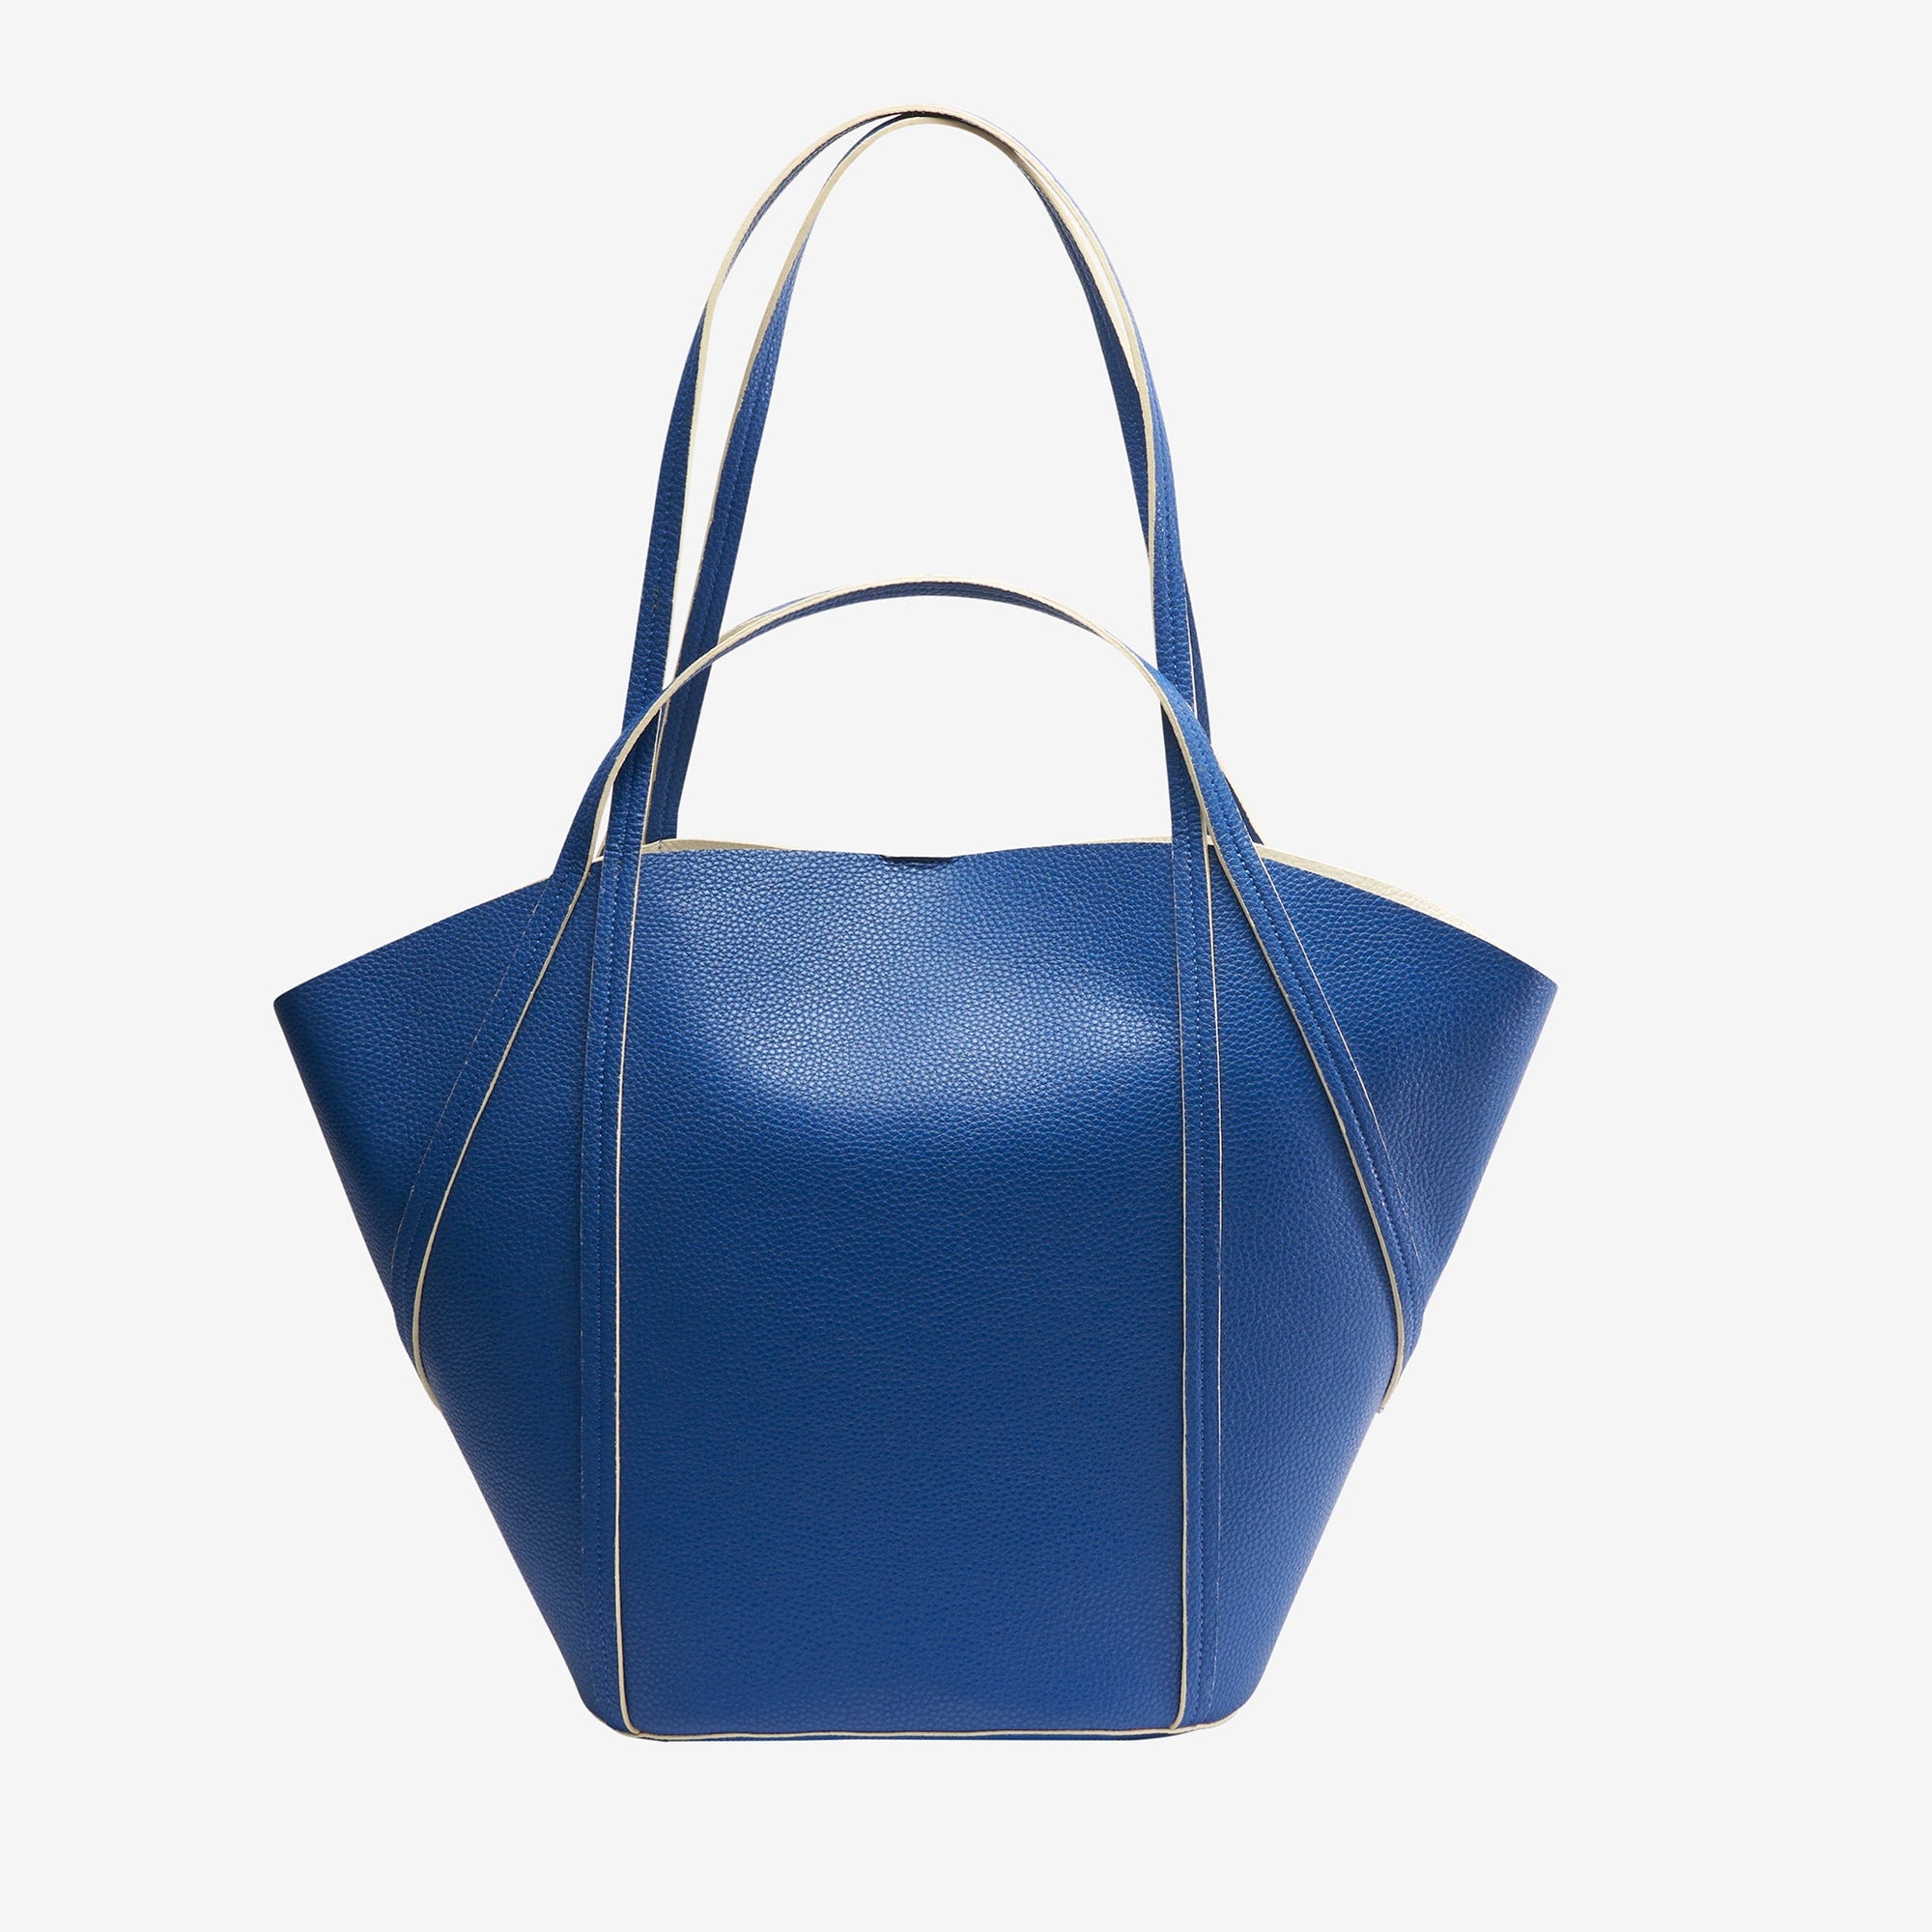     tusk-9931-recycled-sustainable-leather-tote-navy-front